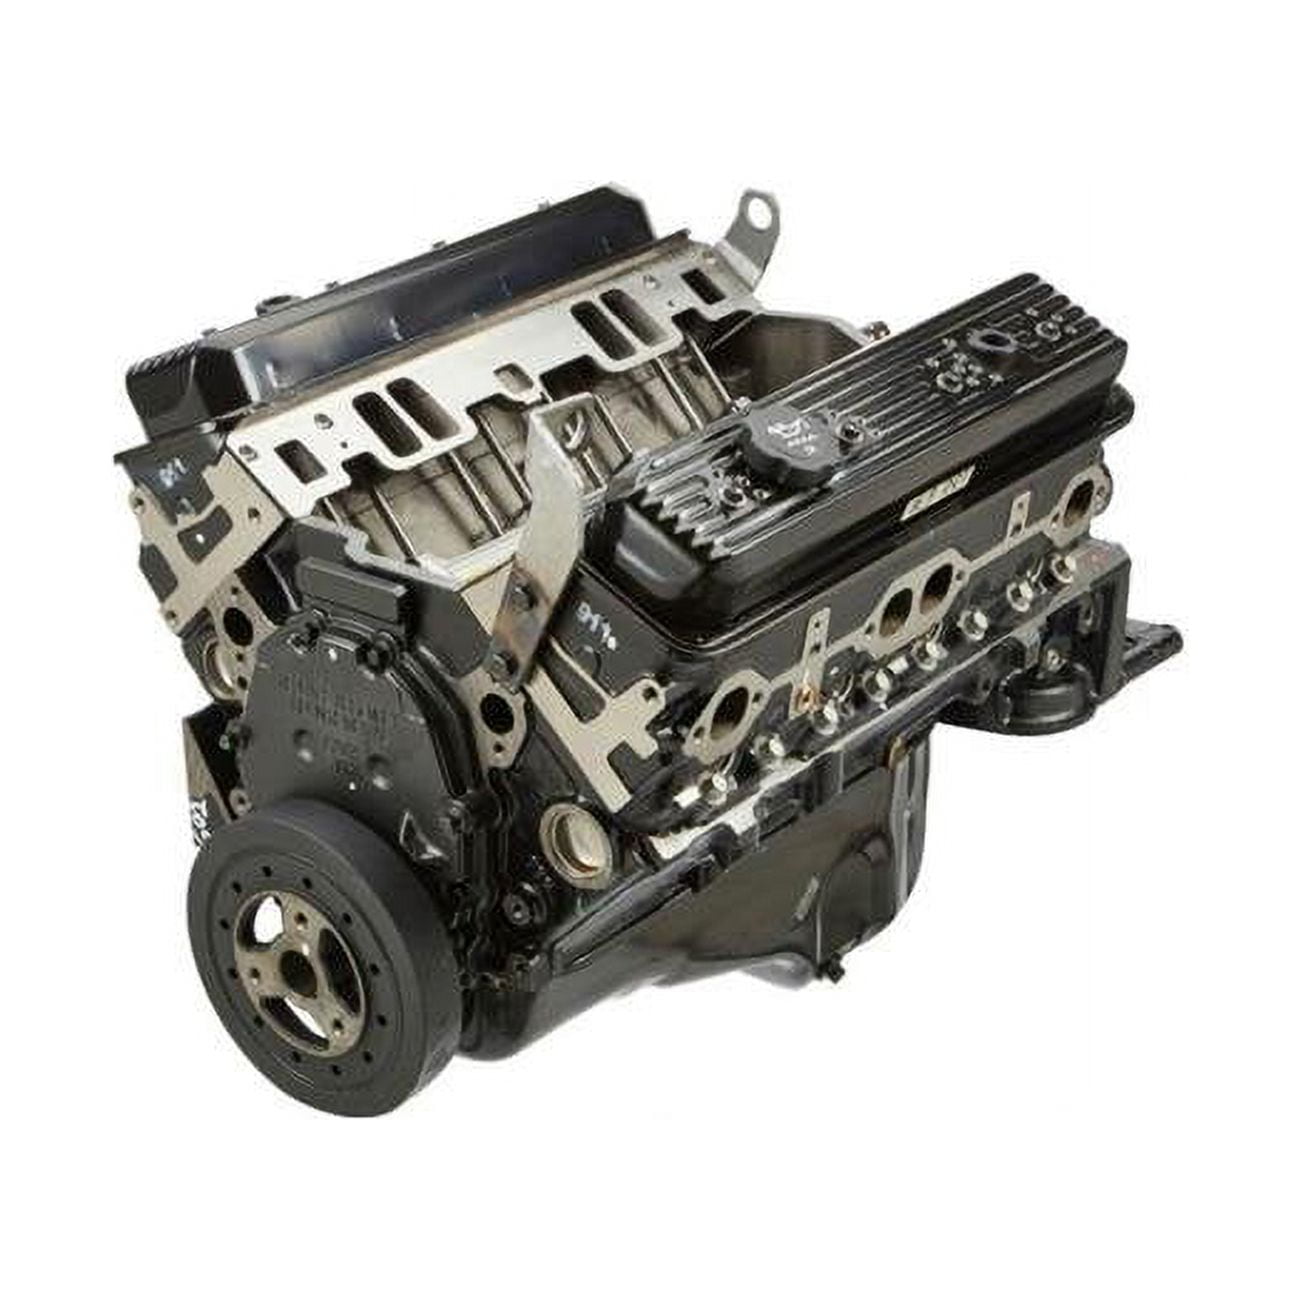 Chevy GM 5.7 350 Long Block Crate Engine